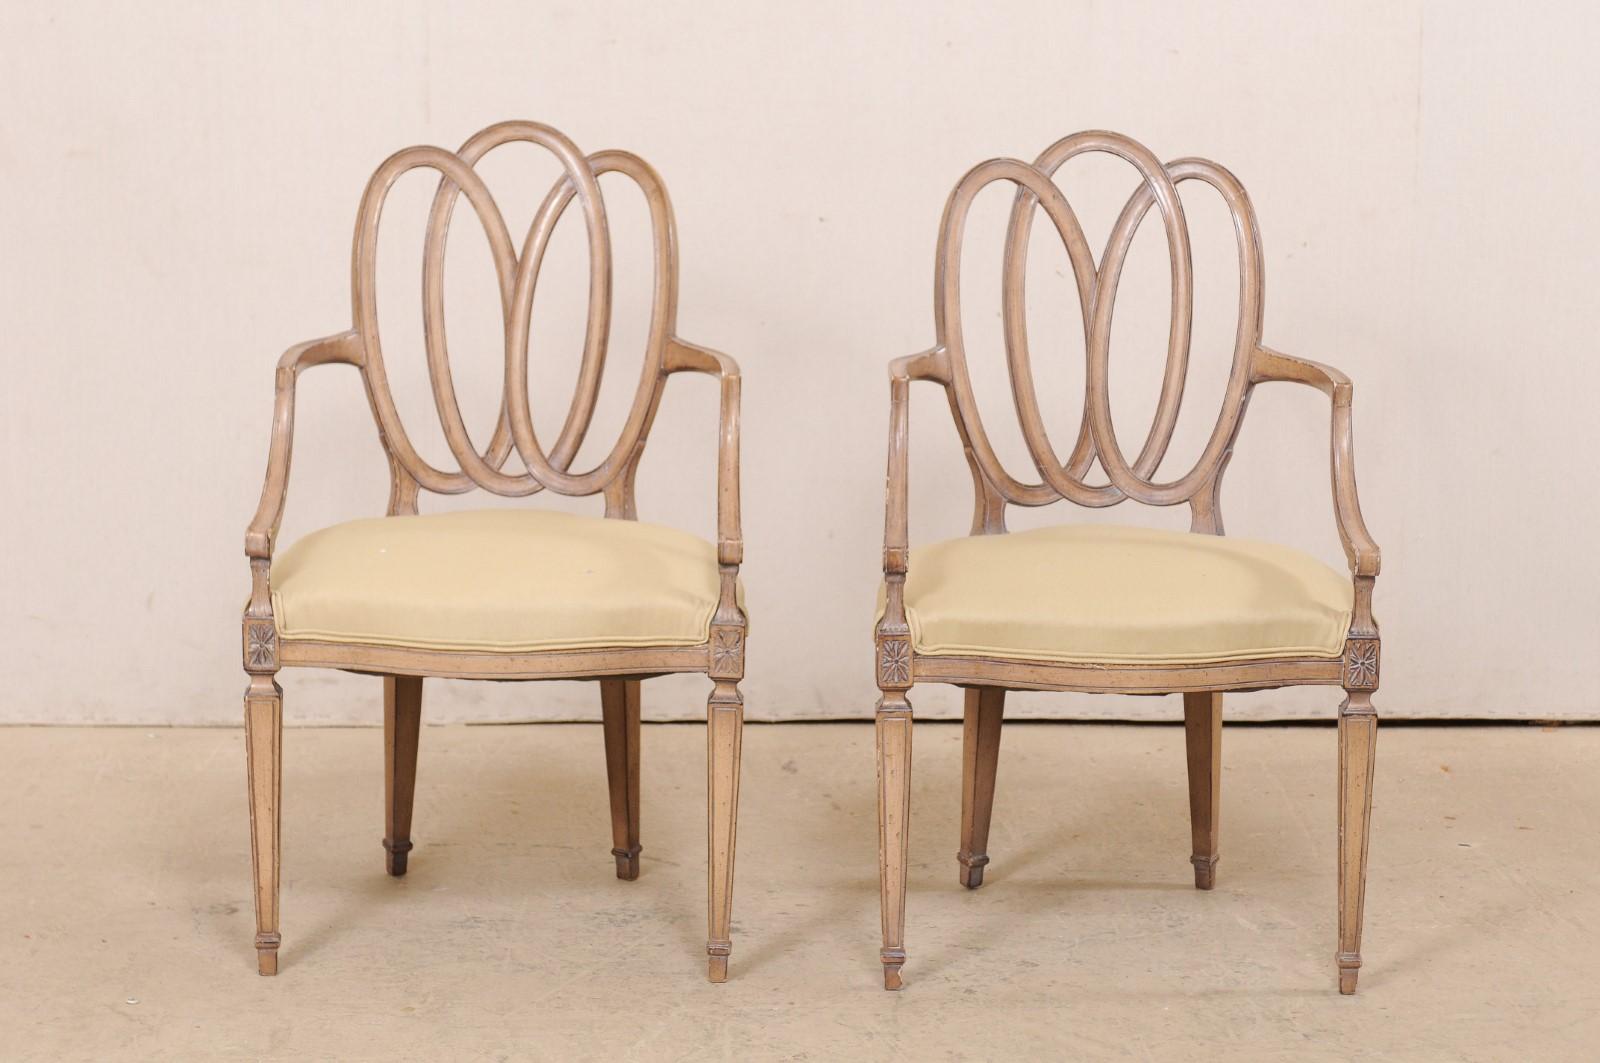 Italian Pair of Carved-Wood Armchairs with Upholstered Seats, Mid-20th Century For Sale 6